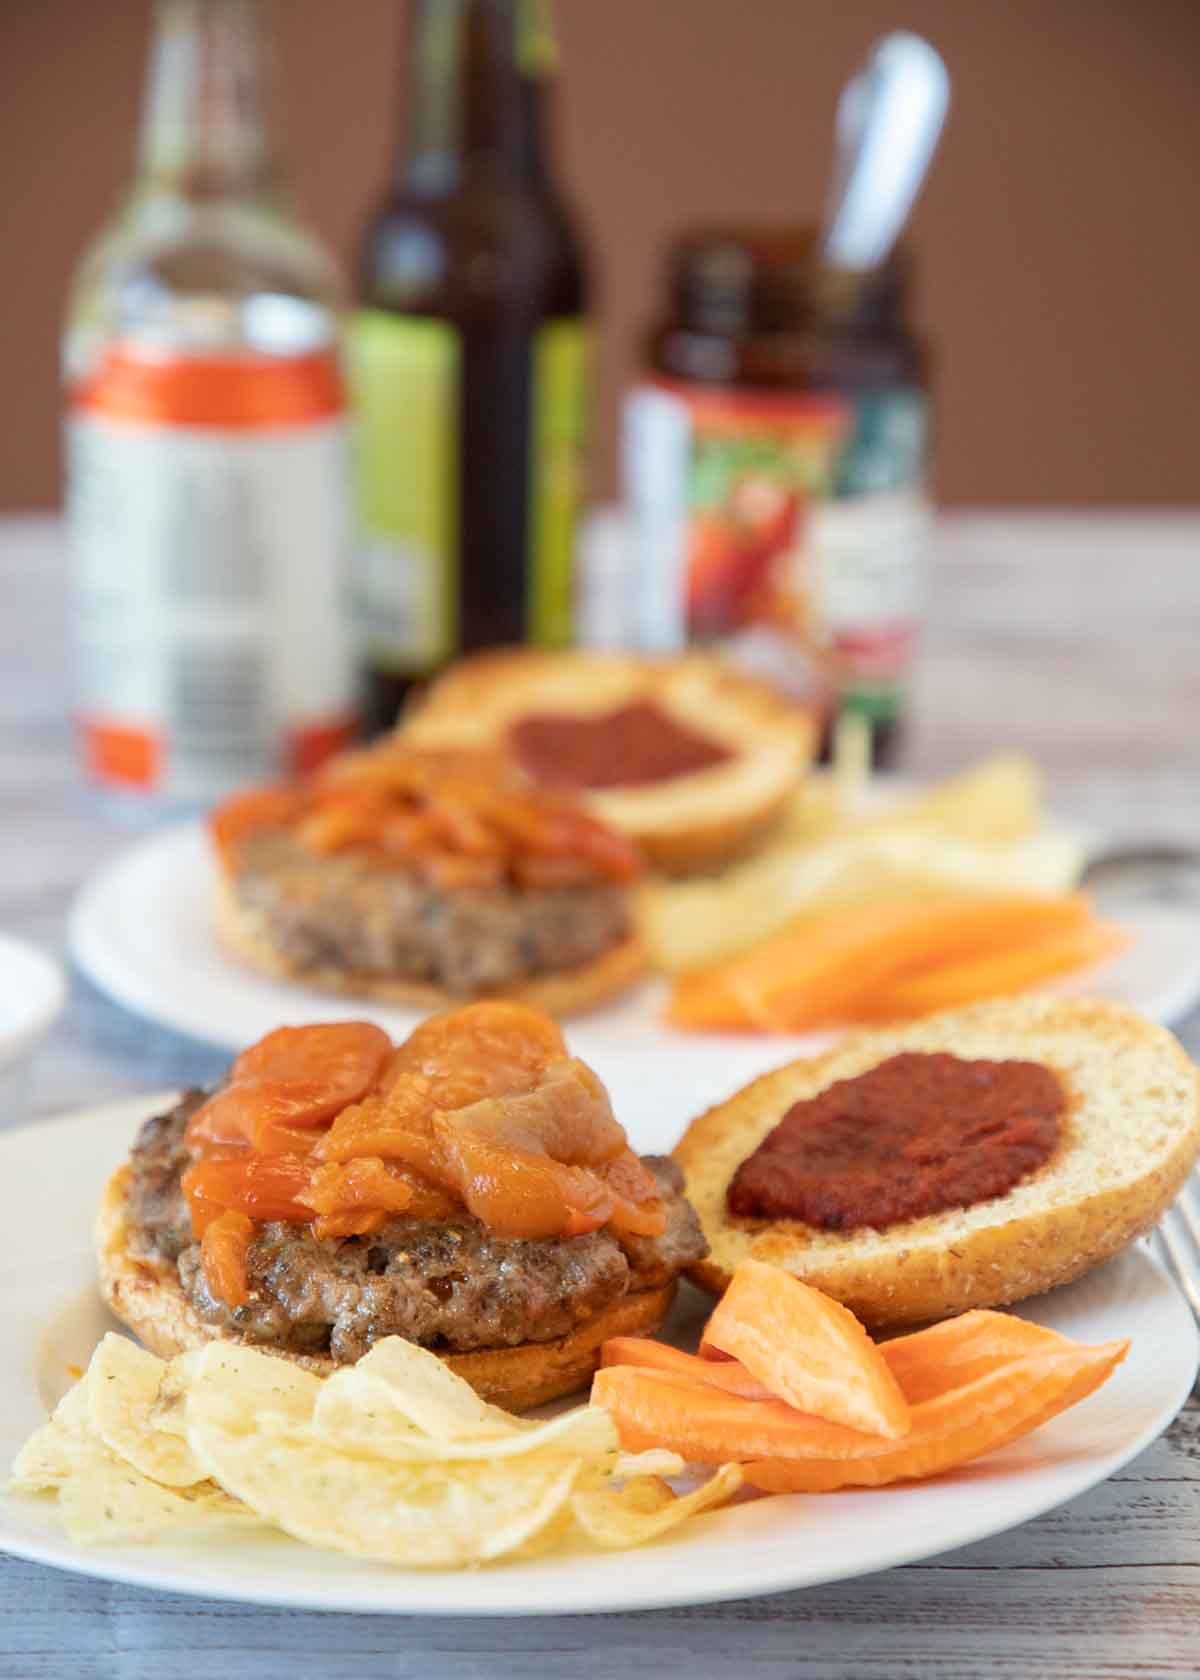 Italian Sausage Sandwiches are delicious topped with pizza sauce and peppers. And super easy whether you go with commercial sausages or homemade.